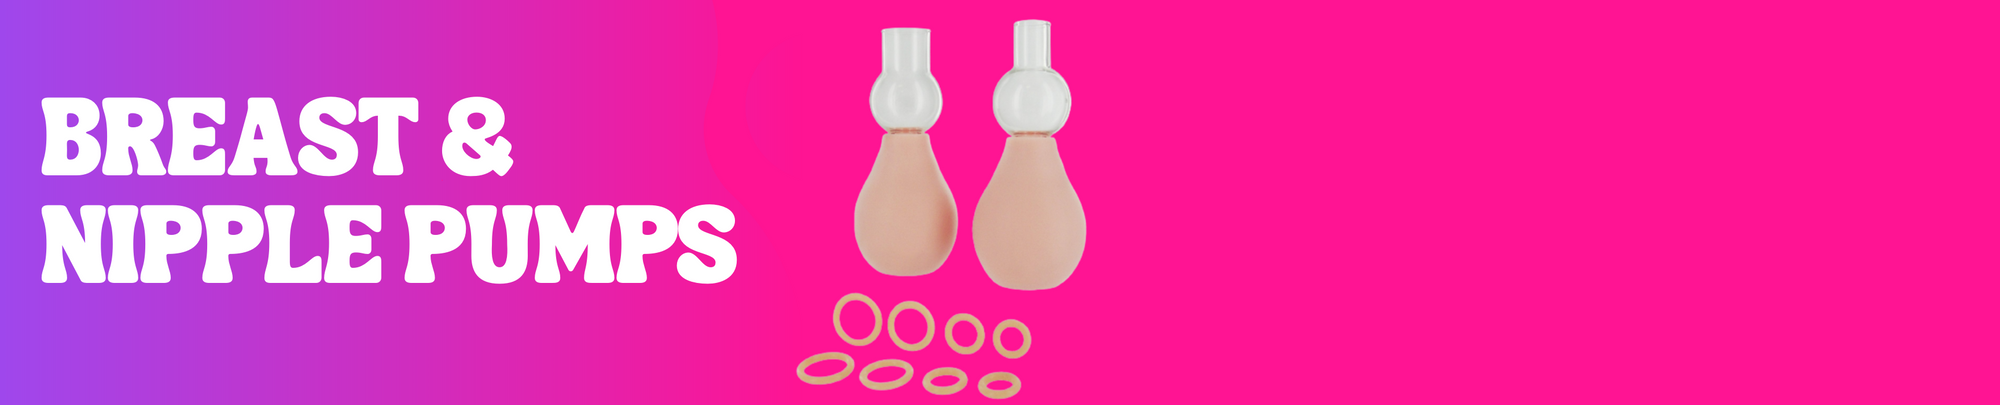 Breast and Nipple Pumps